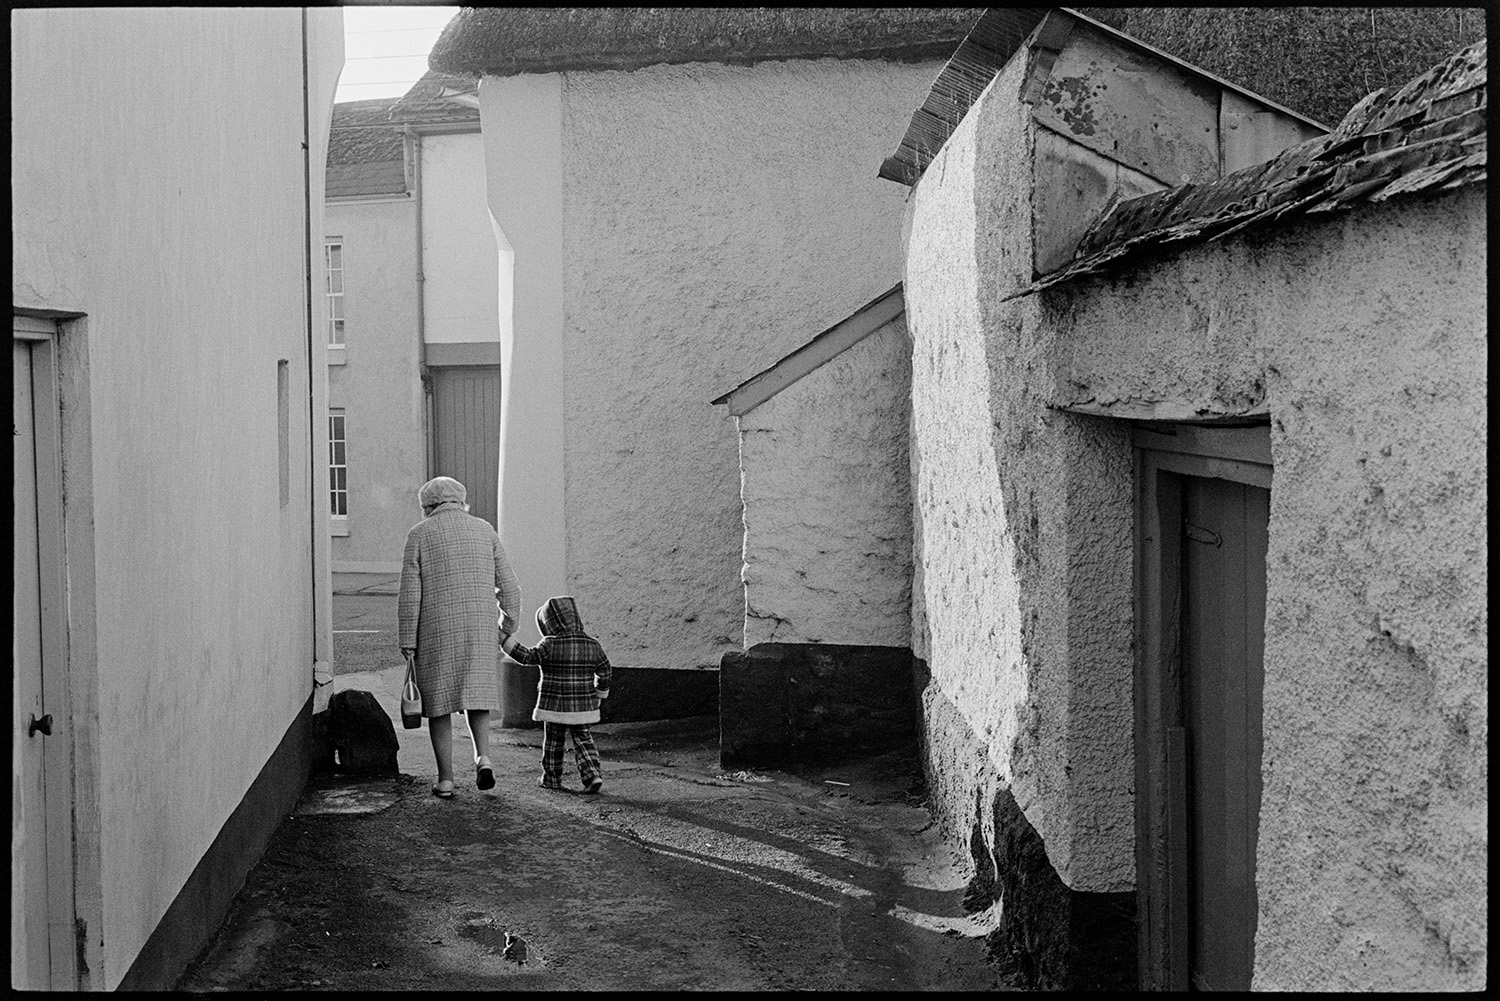 Back lane with cob walls and passers by. 
[A woman and child walking along Buddle Lane, Hatherleigh past the walls of a cob cottage.]